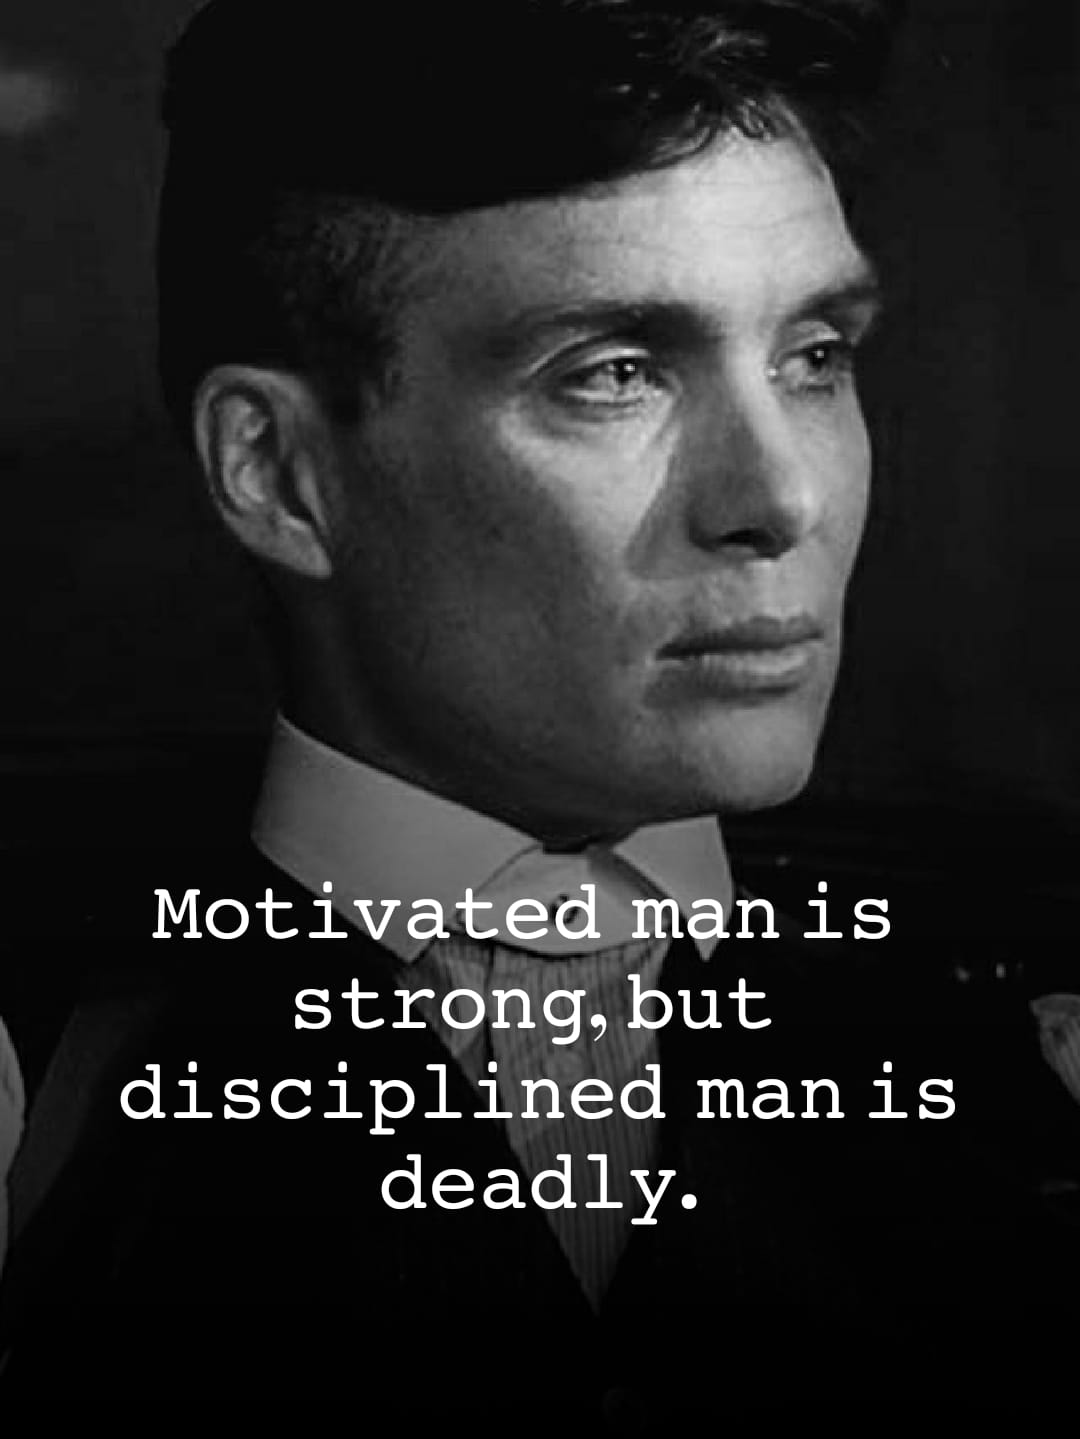 Motivated man is strong. But a disciplined man is deadly.